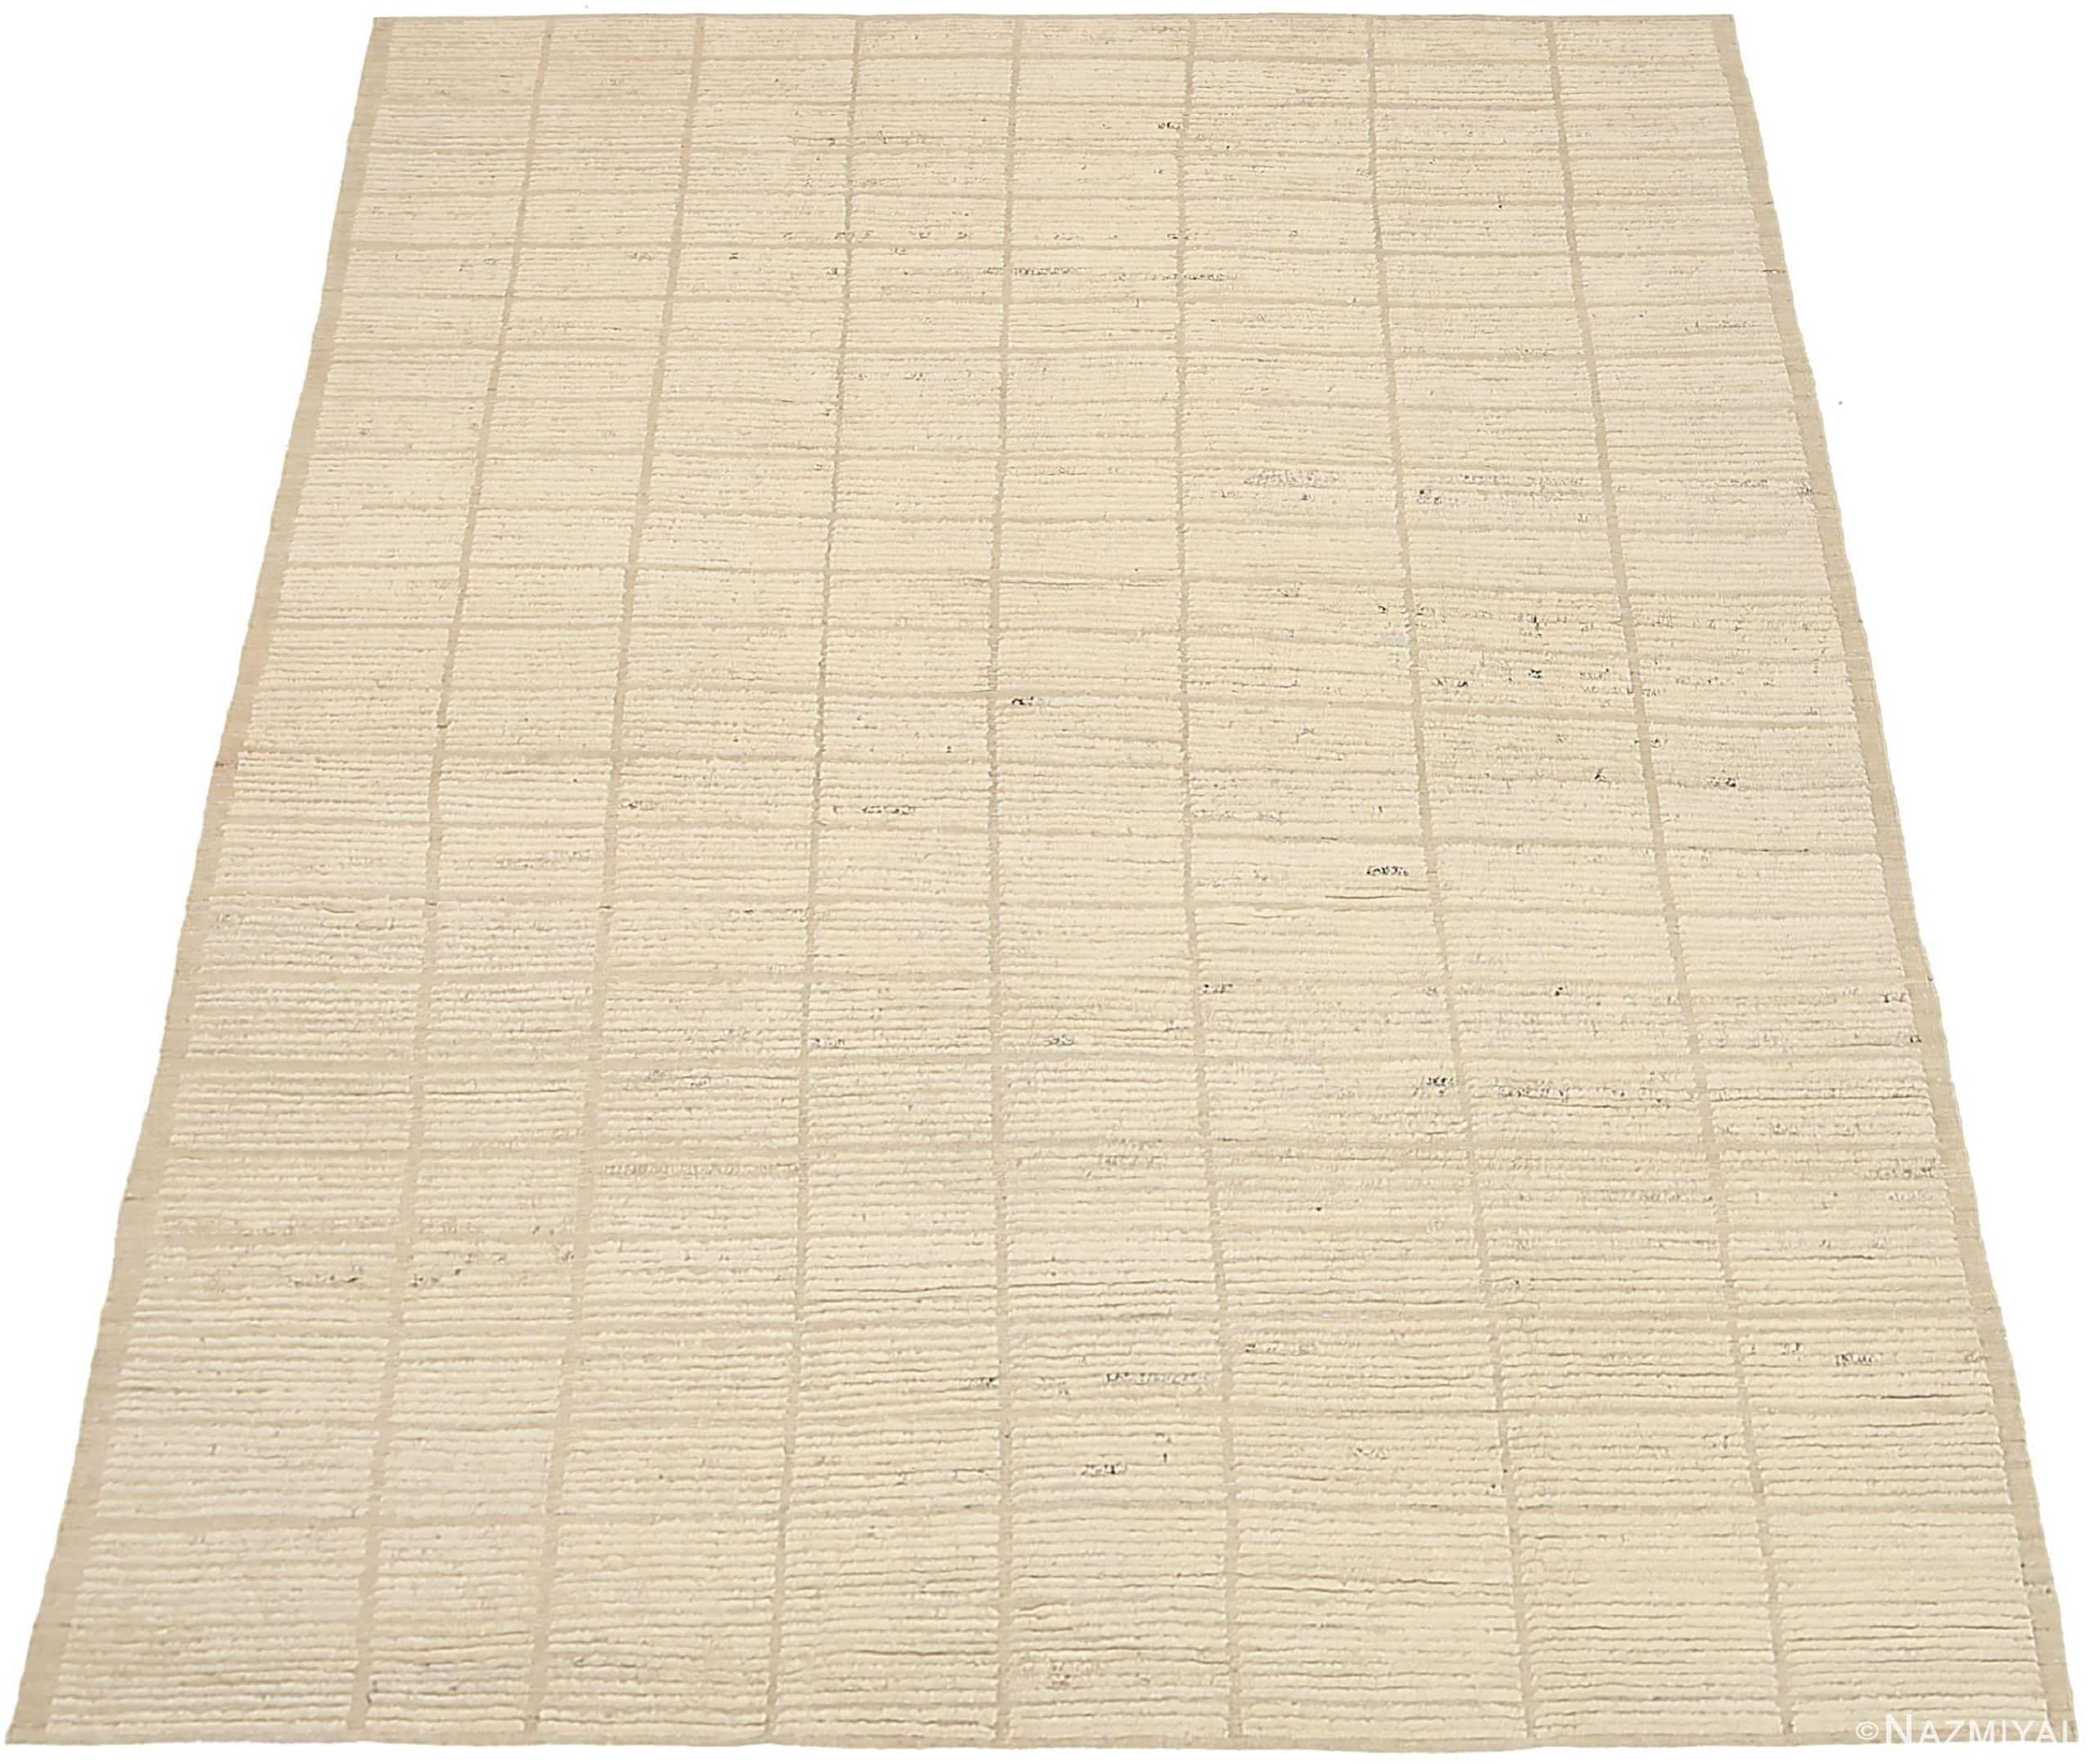 Whole View Of Ivory Textured Modern Distressed Rug 60822 by Nazmiyal Antique Rugs